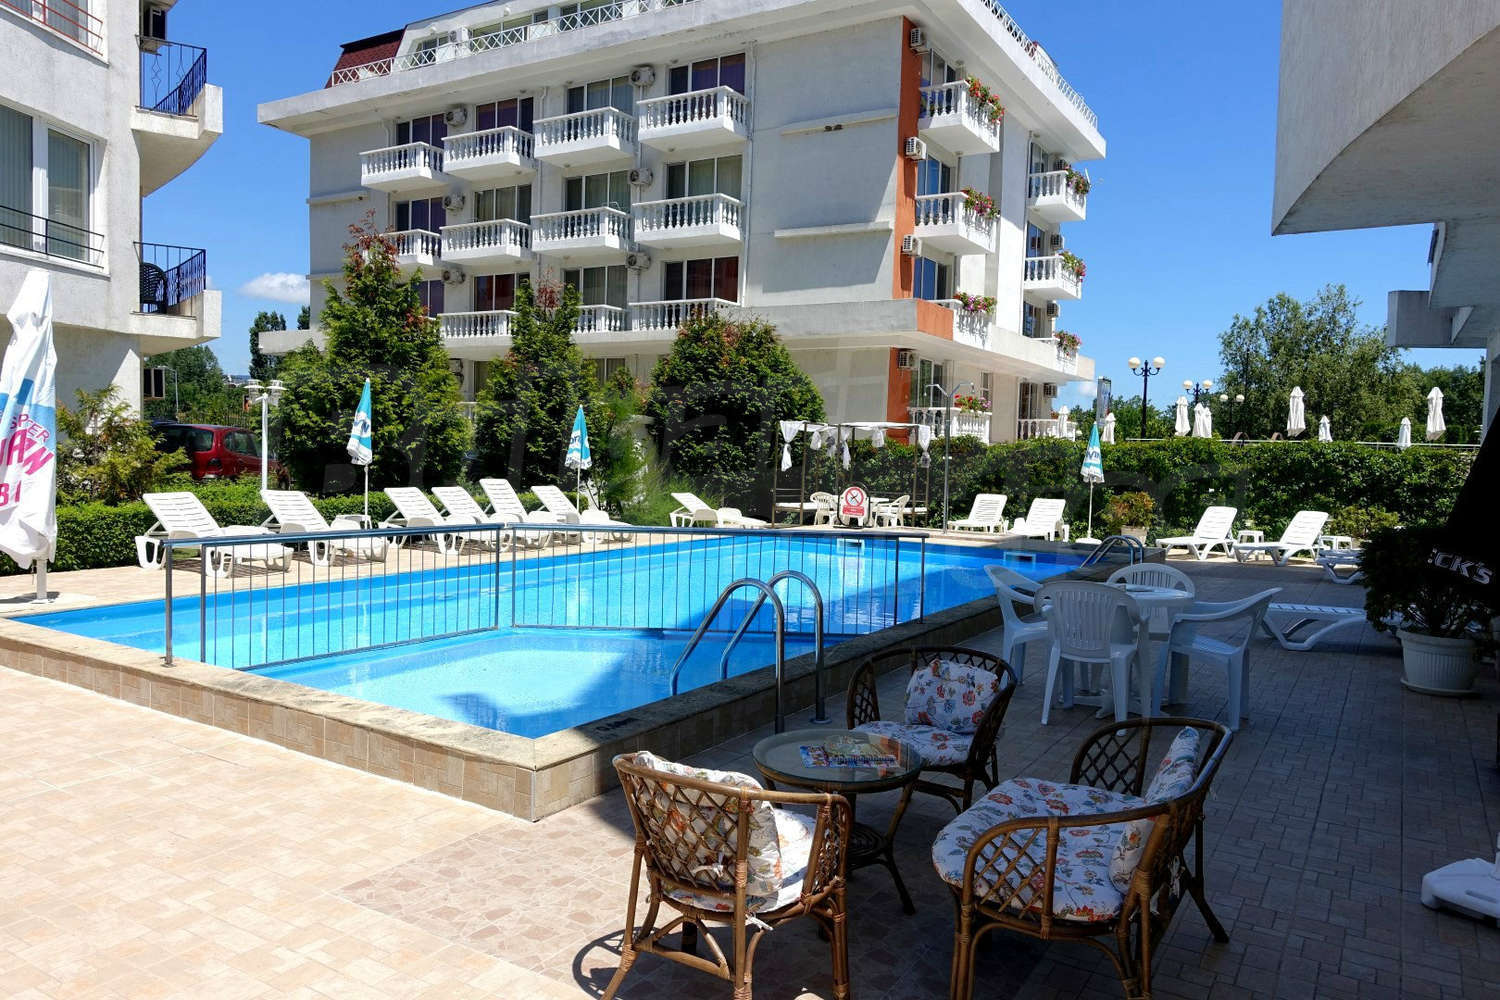 2-bedroom apartment for sale in Azzuro in Sunny Beach, Cacao Beach ...